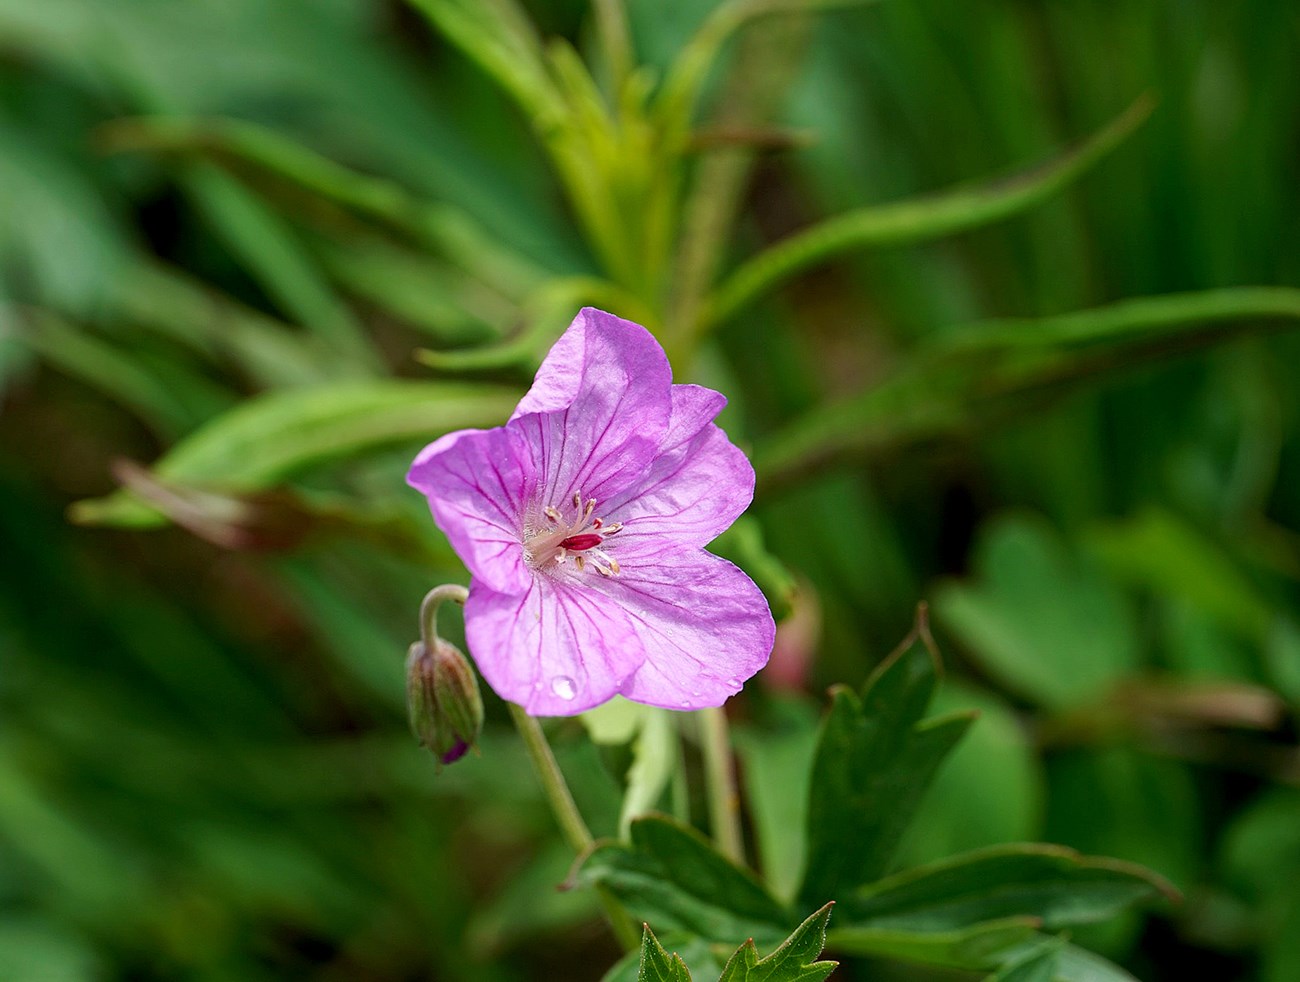 A pink flower stands out against green vegetation